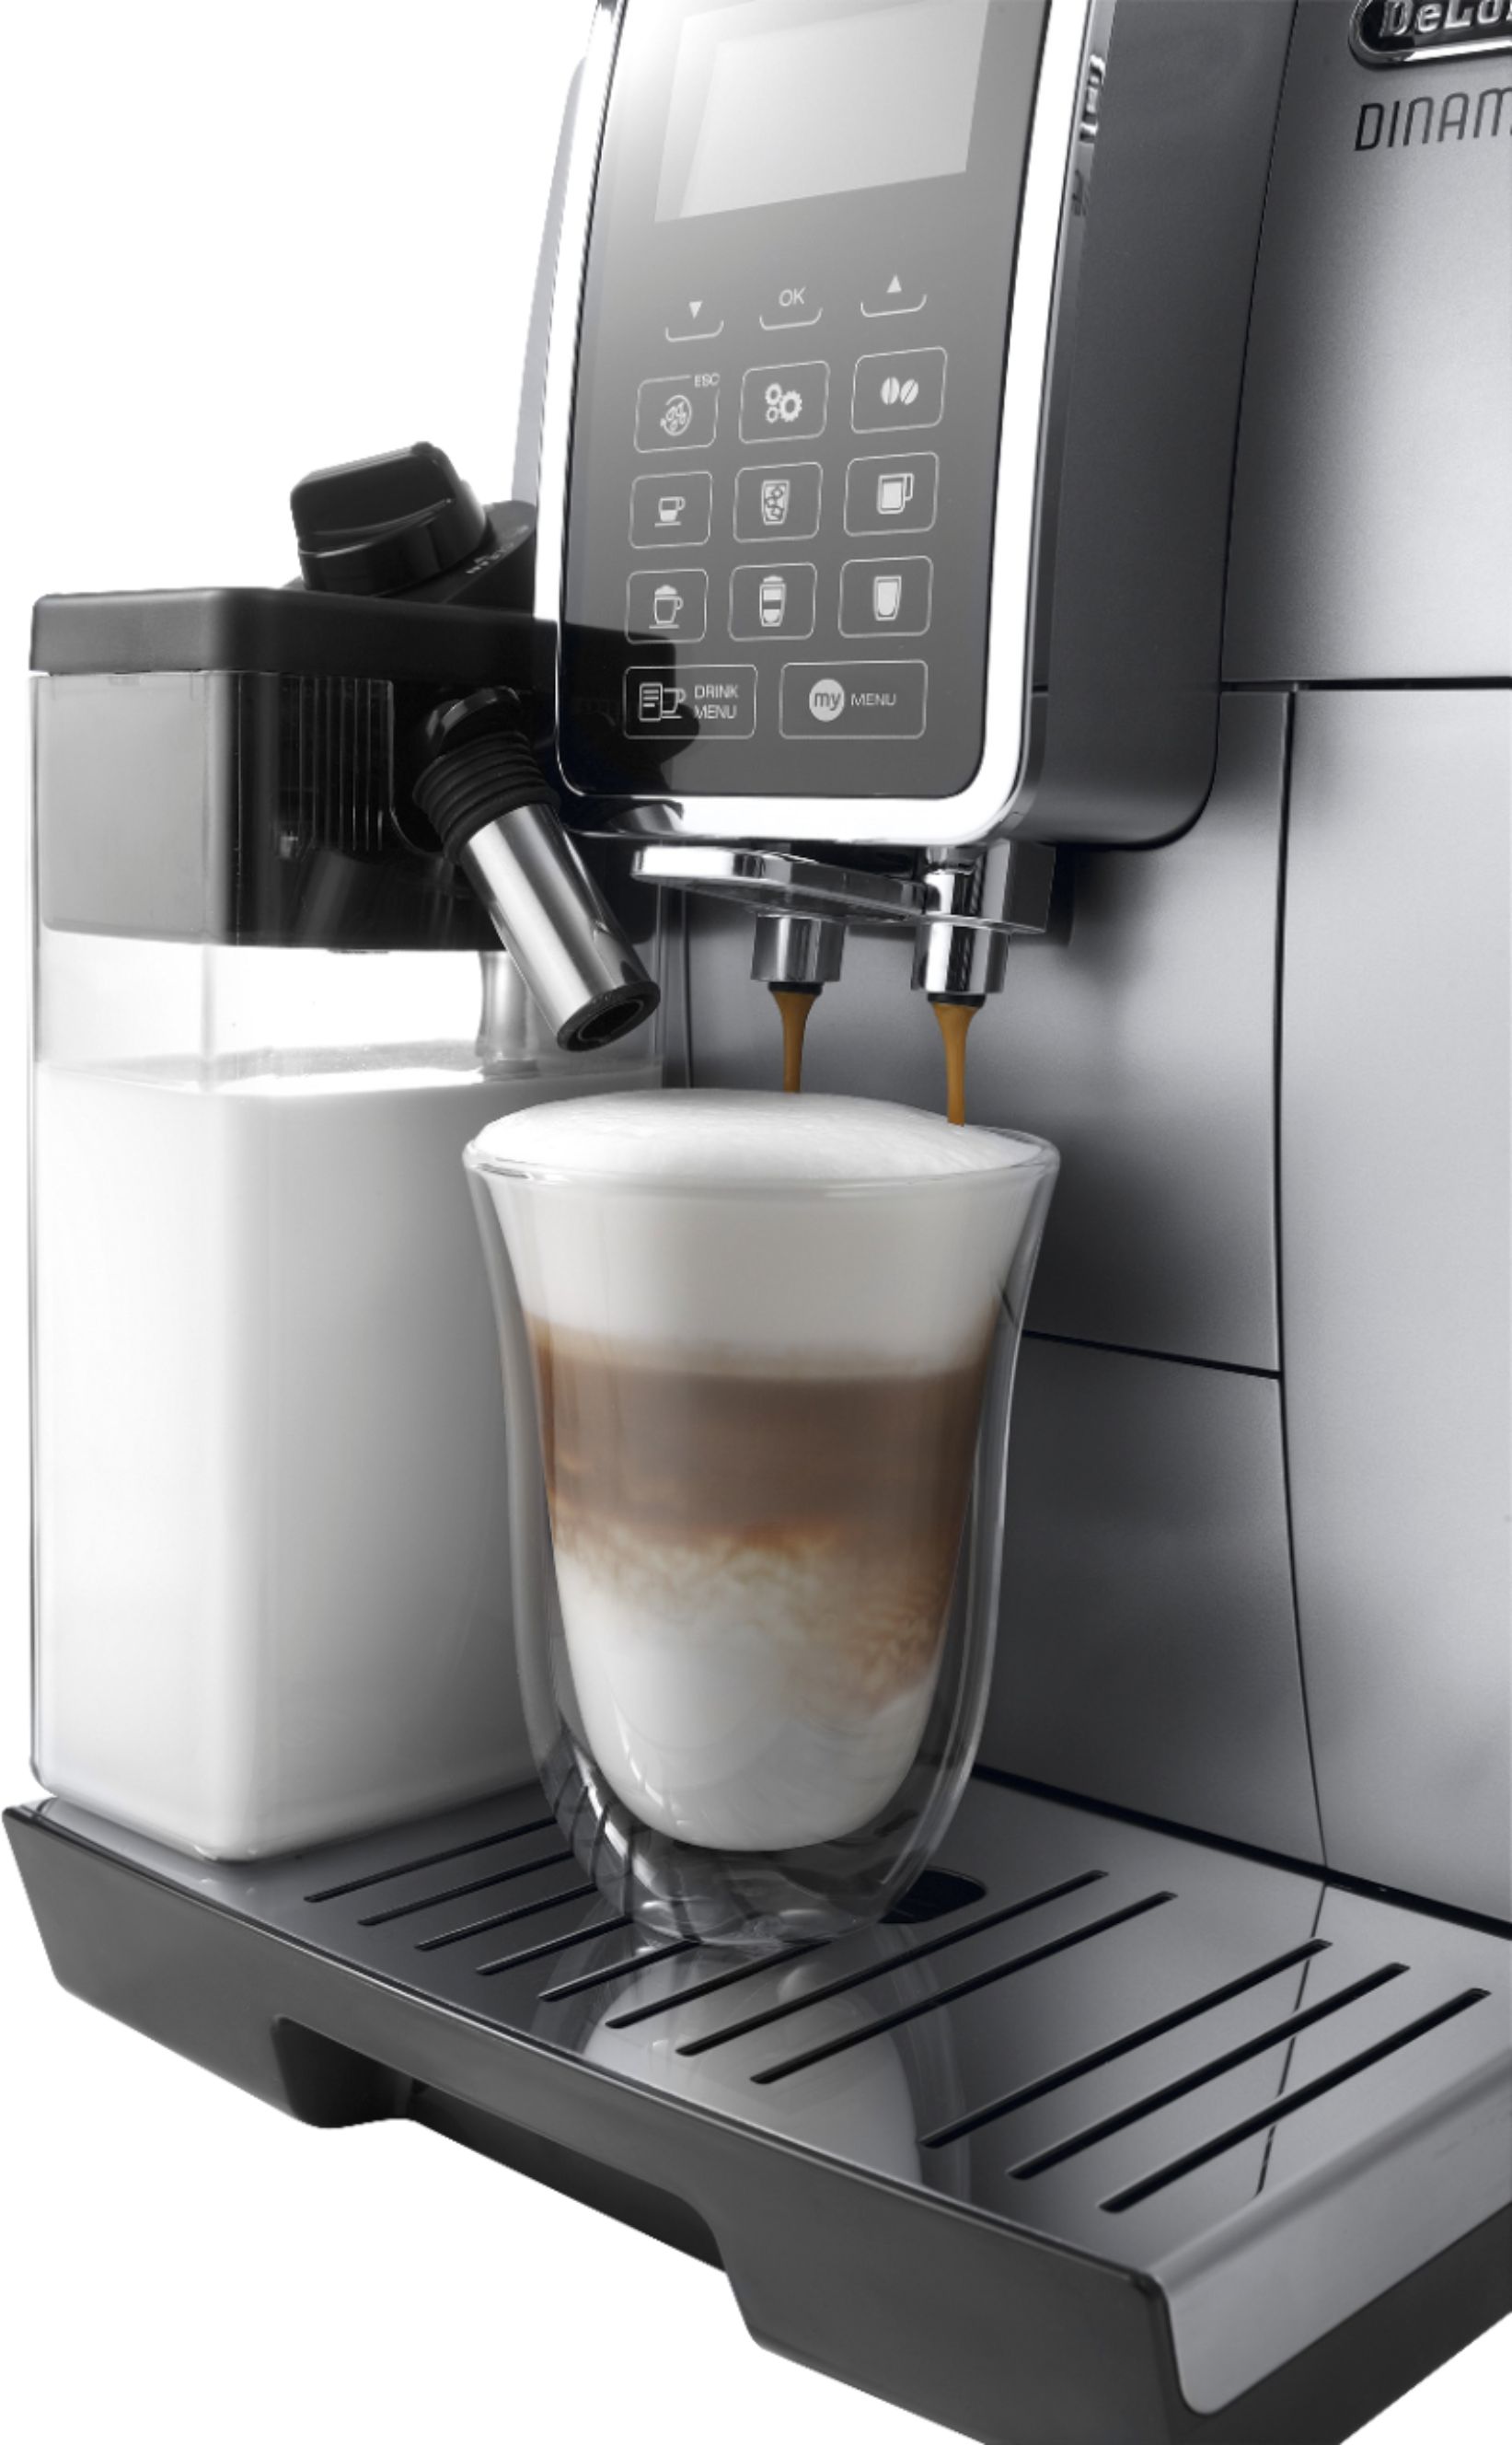 Best Buy: De'Longhi De'Longhi Dinamica Fully Automatic Coffee and Espresso  Machine, with Premium Adjustable Frother Chrome and Black ECAM35025SB